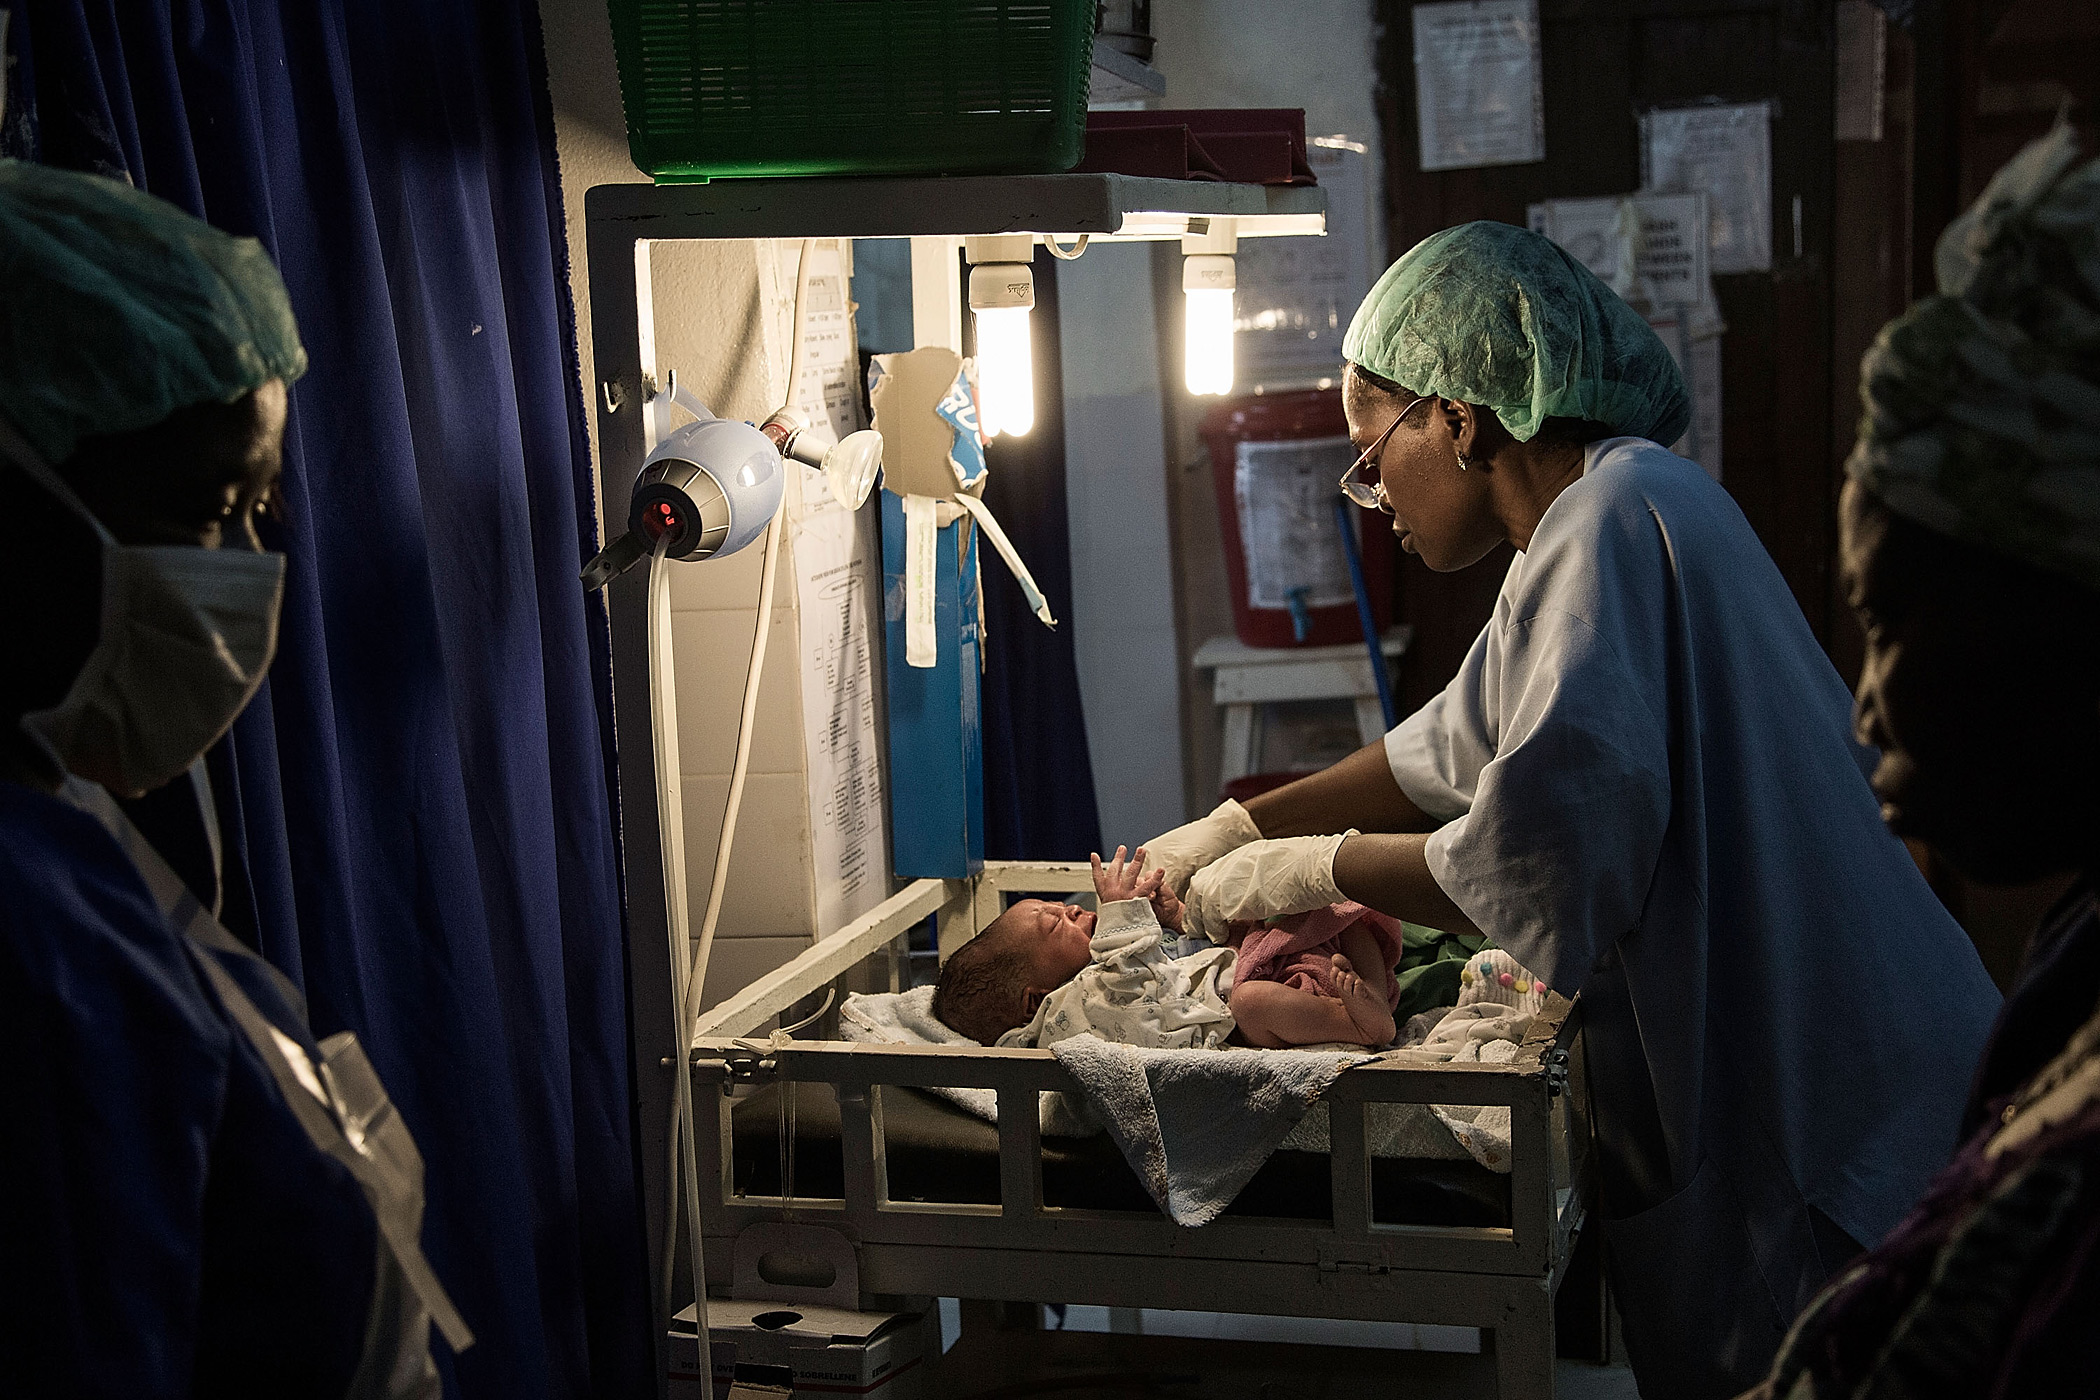 Doctors give emergency treatment to a new born baby at the Gondama Referral Centre on March 9, 2014 in Bo, Sierra Leone. (Lam Yik Fei—Getty Images)